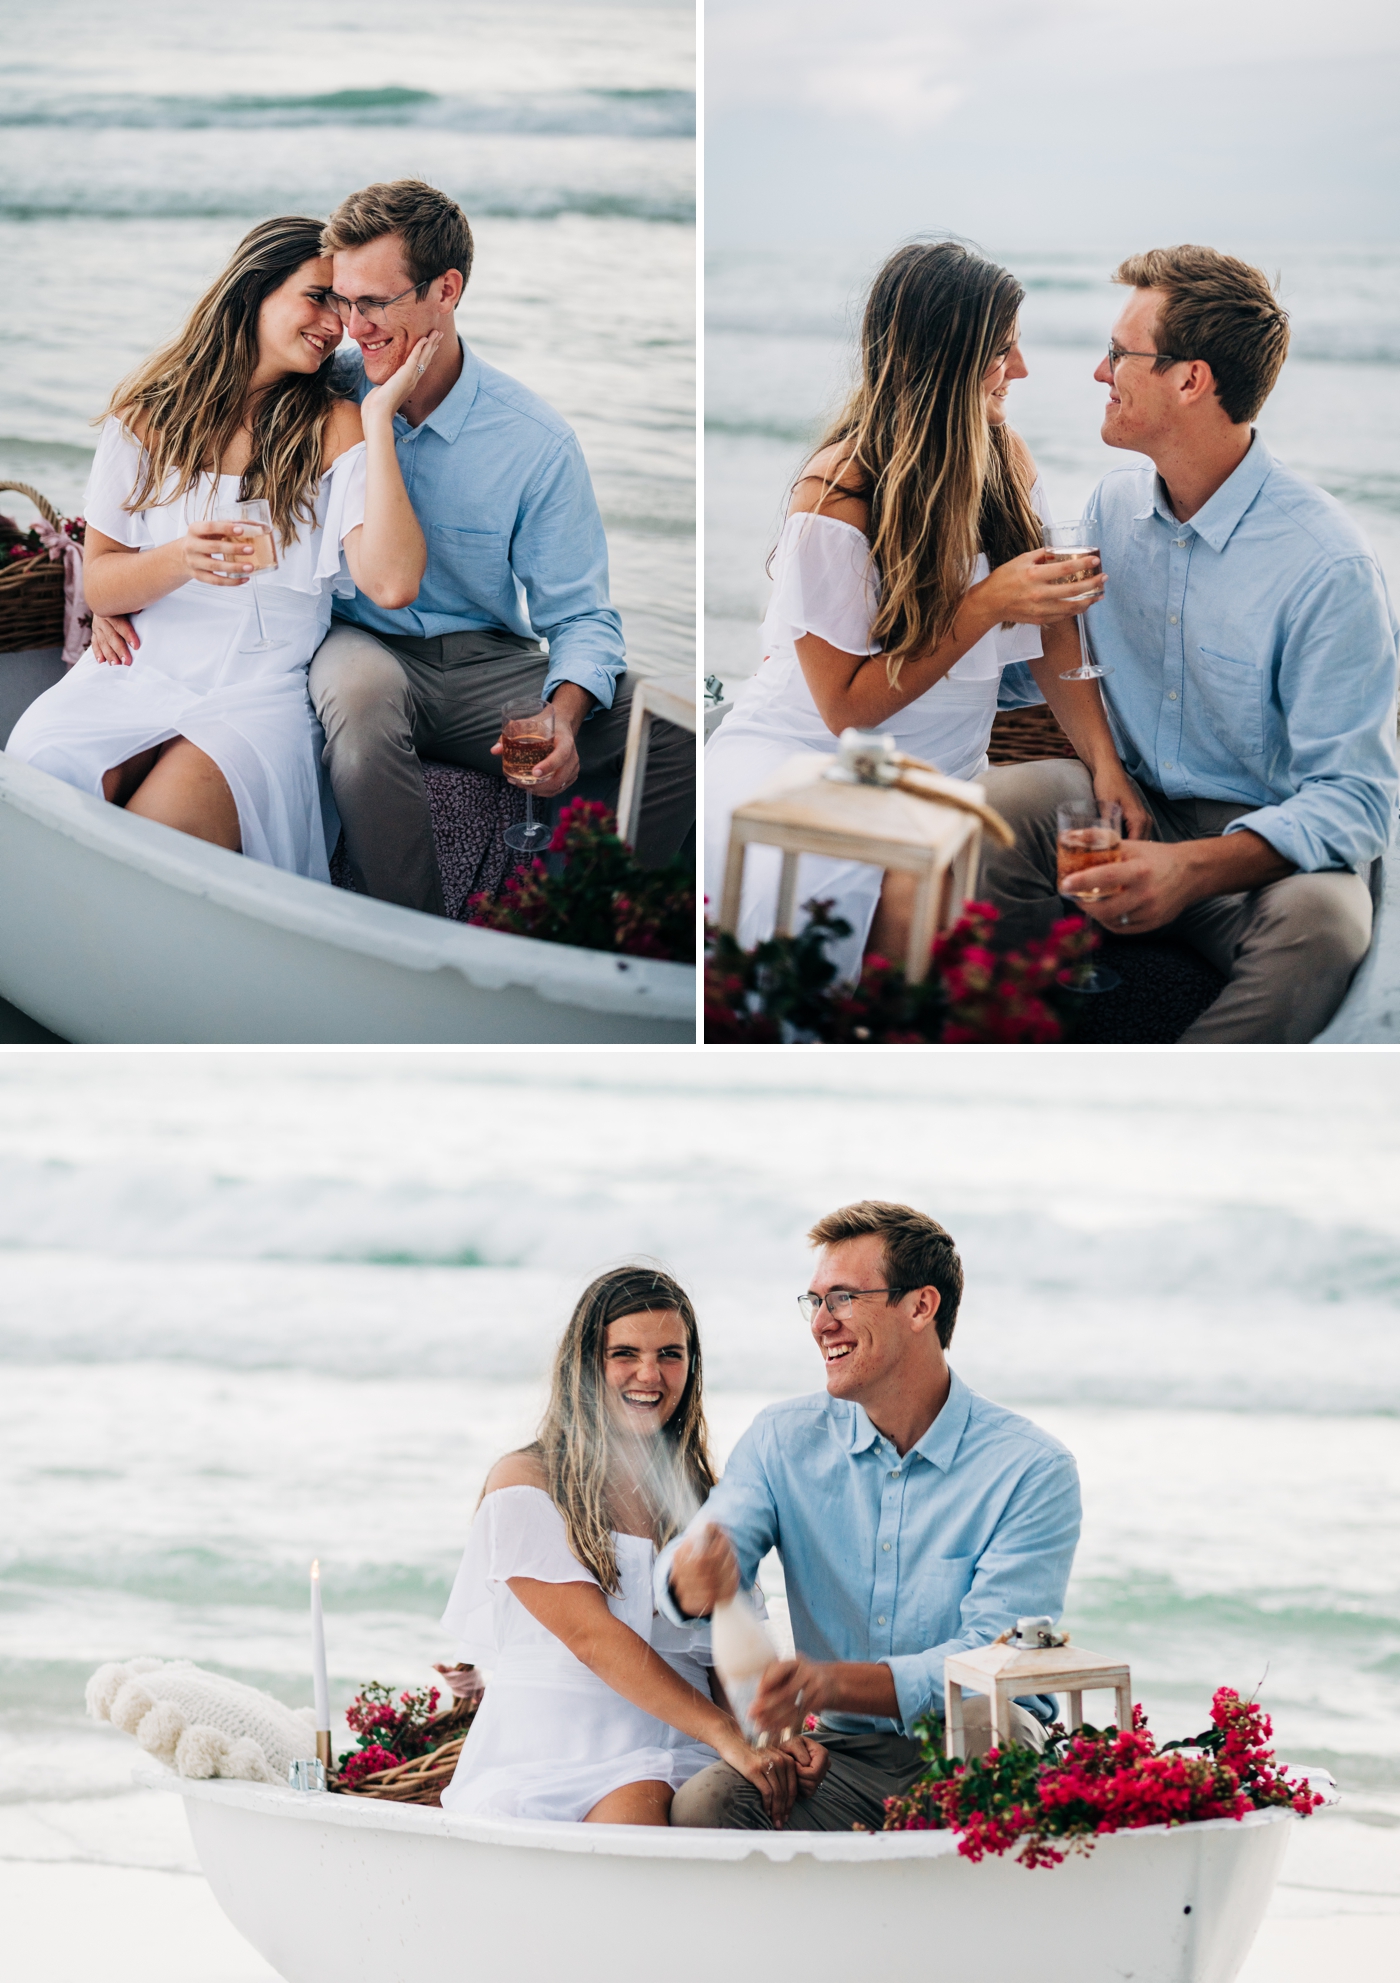 Bride and groom popping champagne during styled engagement shoot in Florida